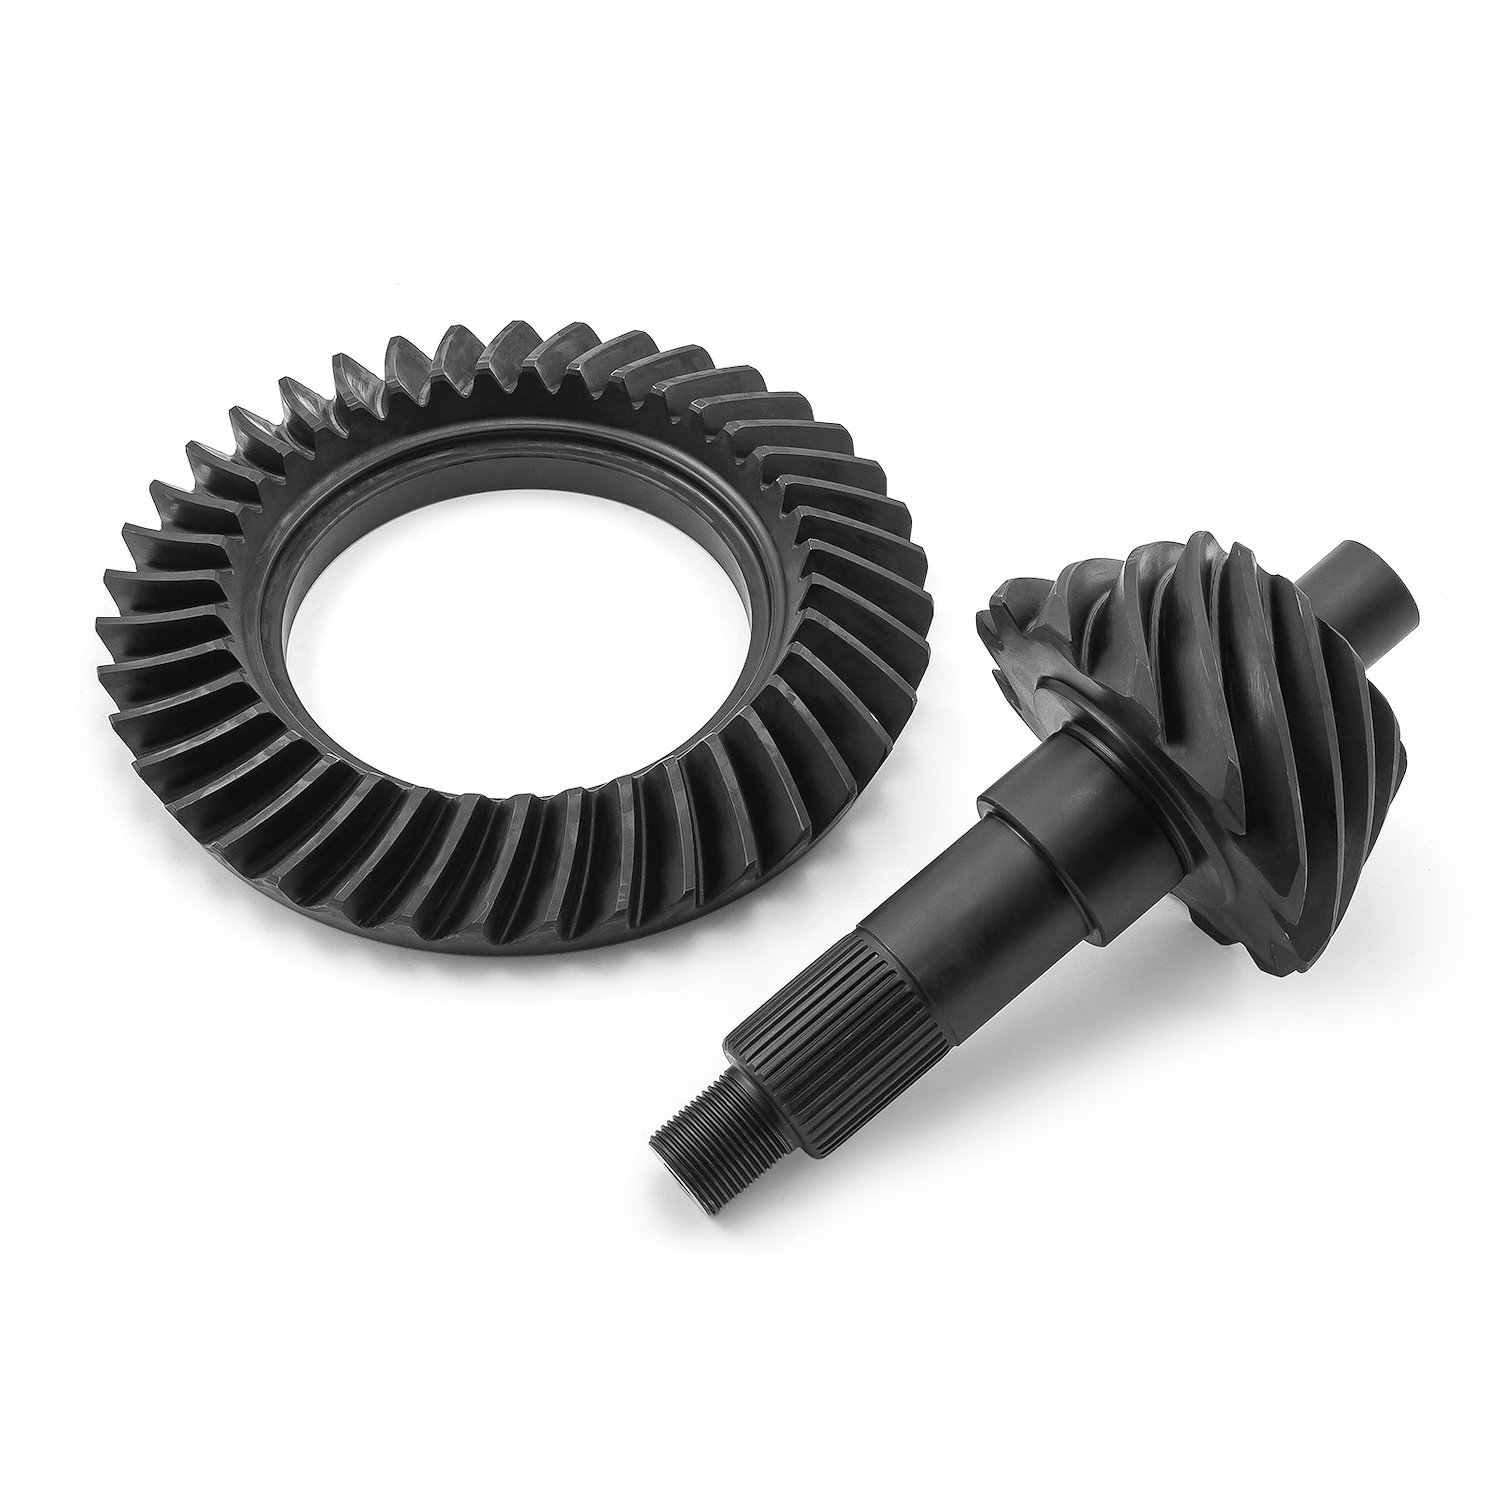 PCE211.1112 Ford 9" 28 Spline 5.38:1 Ratio Ring and Pinion Gears Set 8620